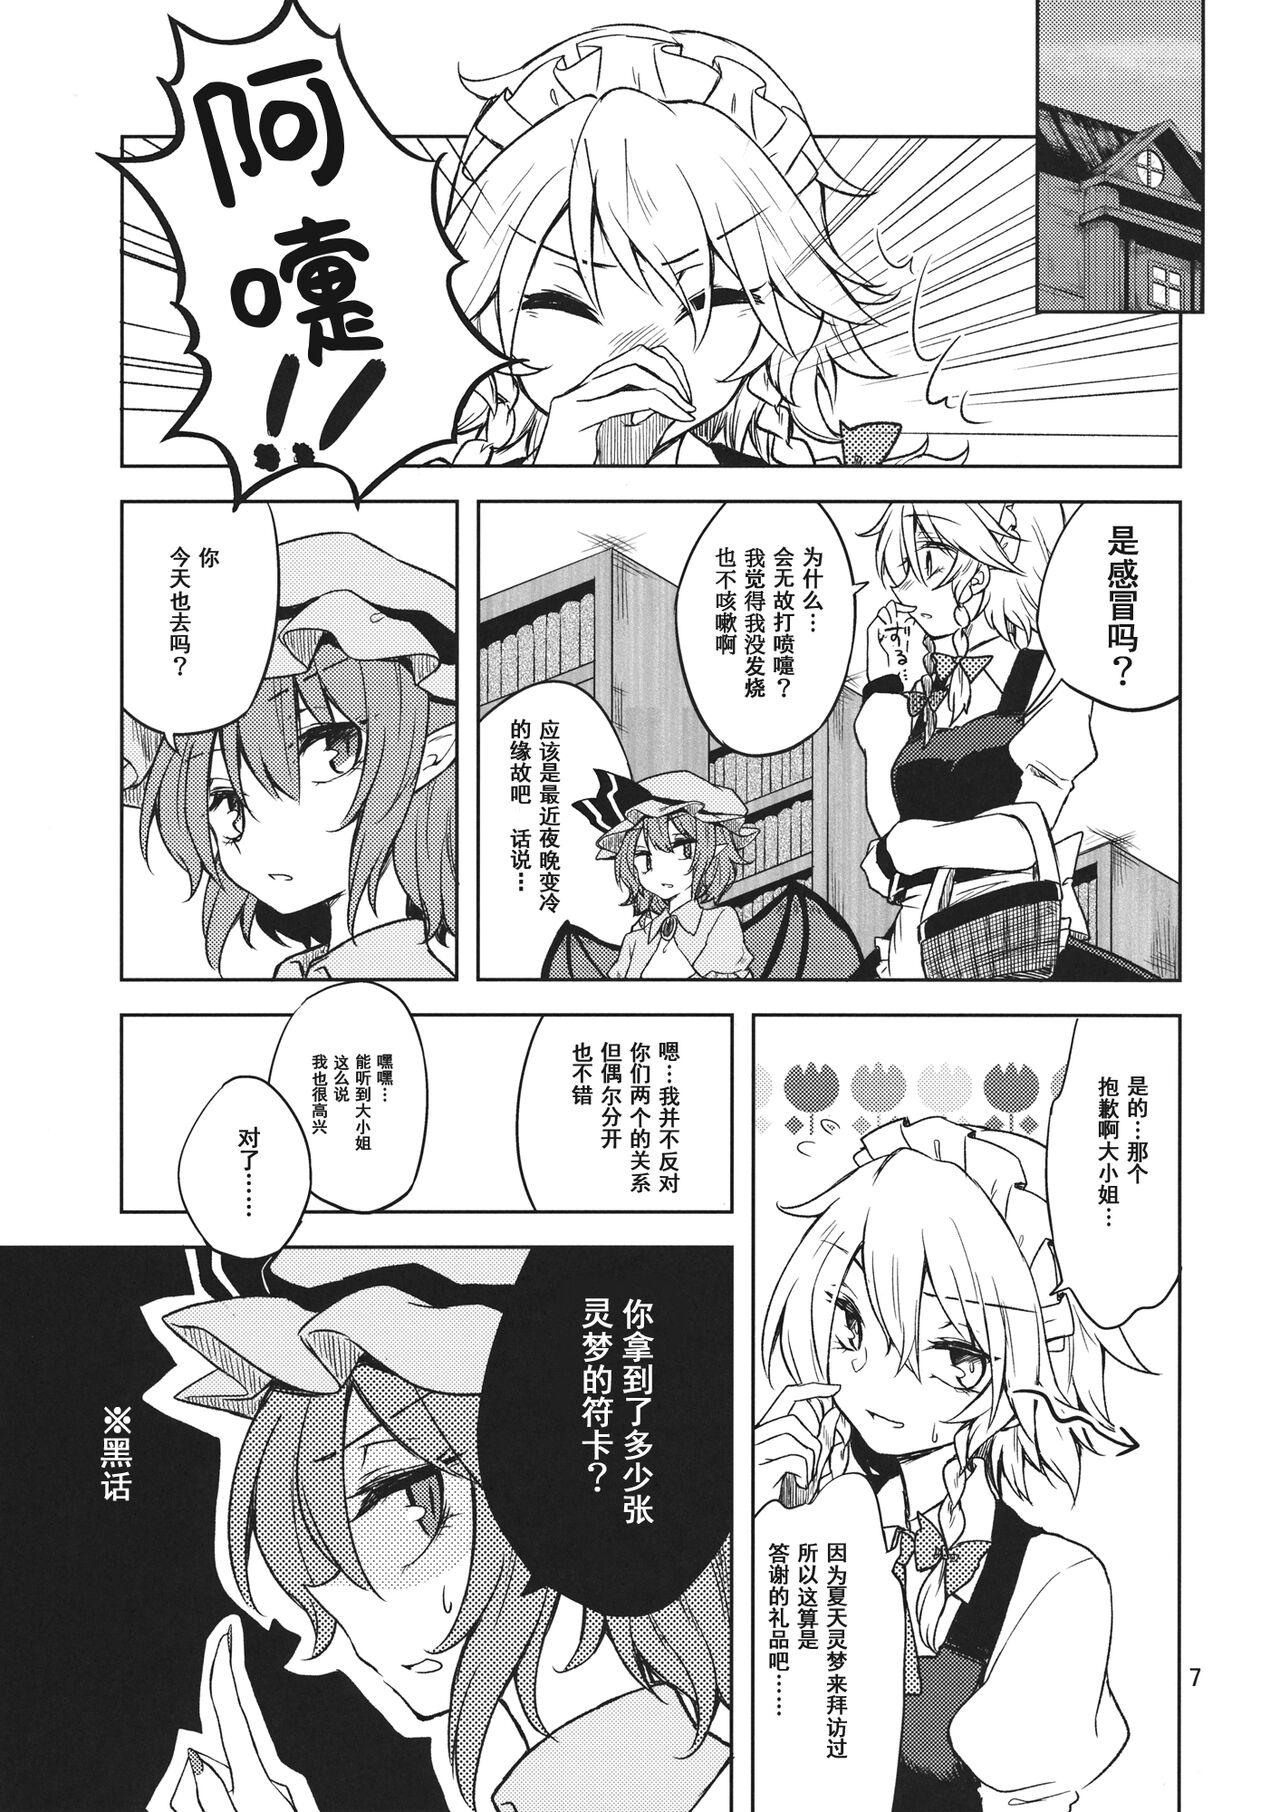 Leggings Shoyamu - First Night Dream - Touhou project Instagram - Page 6